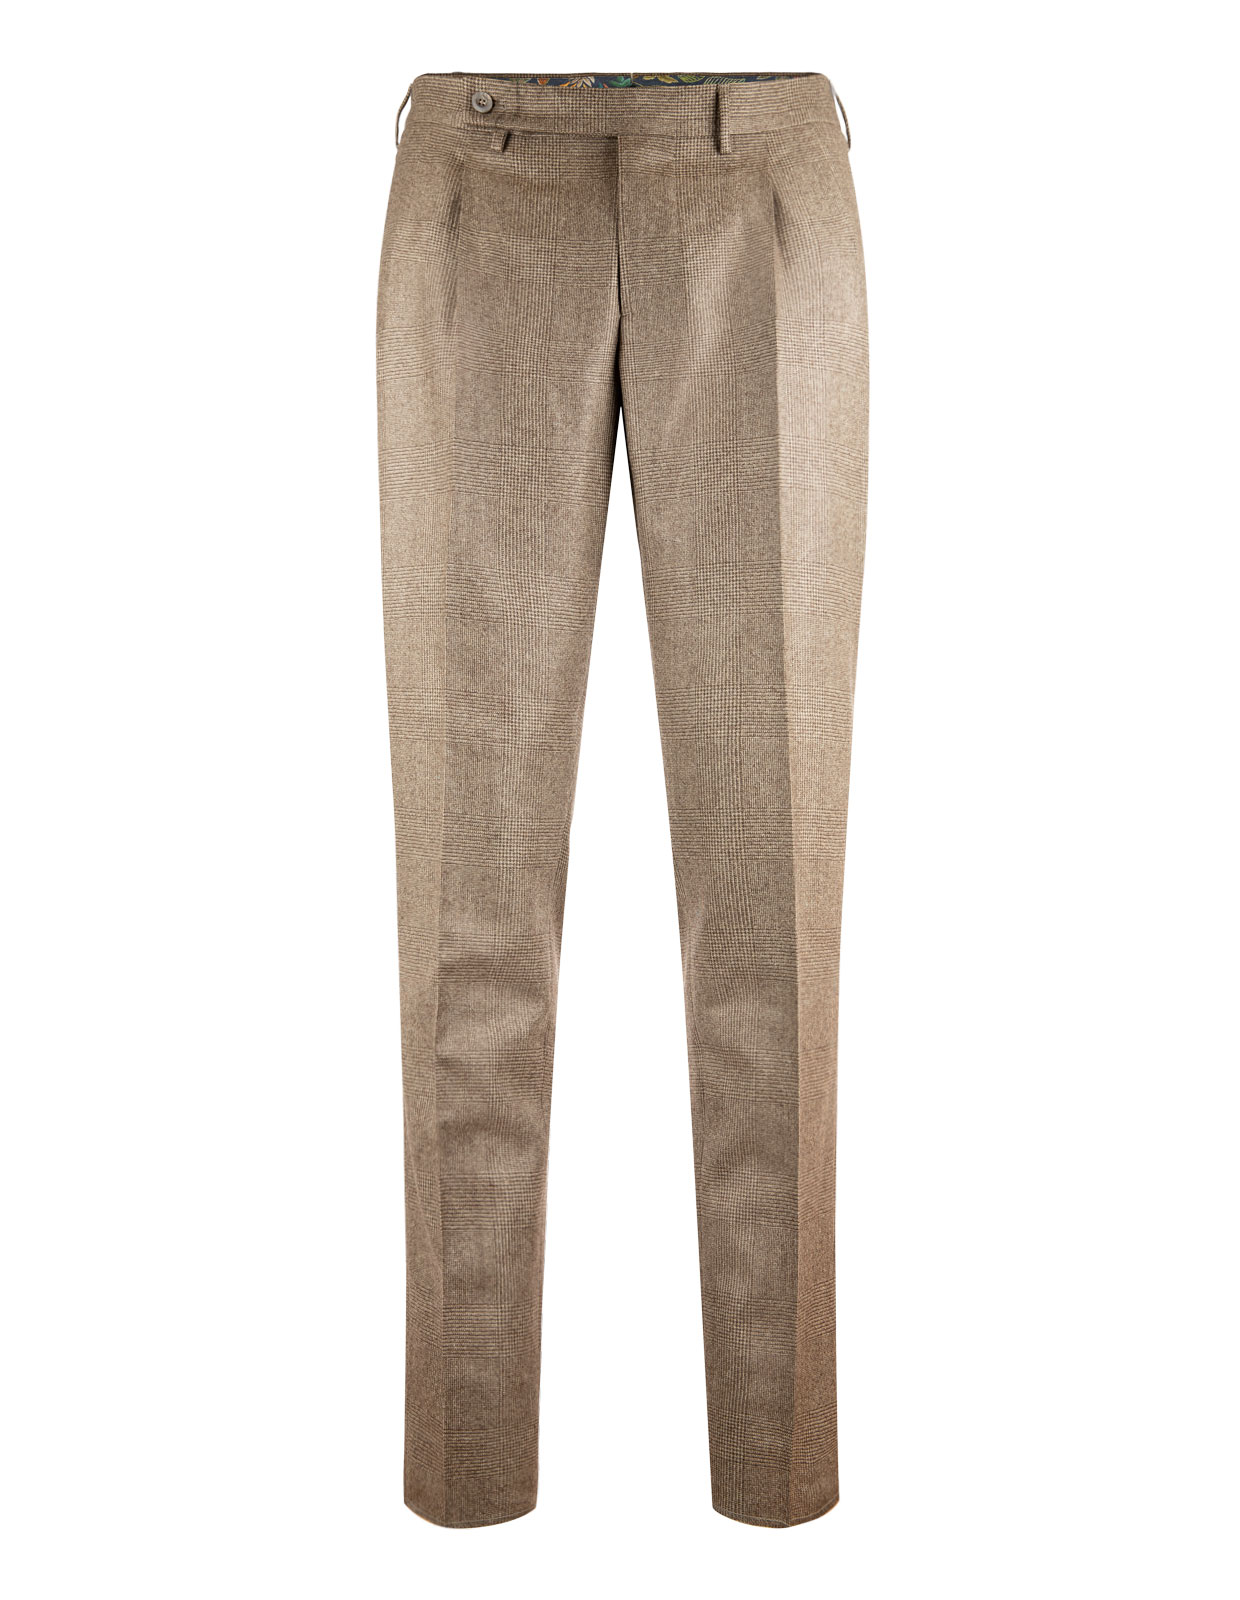 Retro Theca Pleated Glencheck Trouser Brown